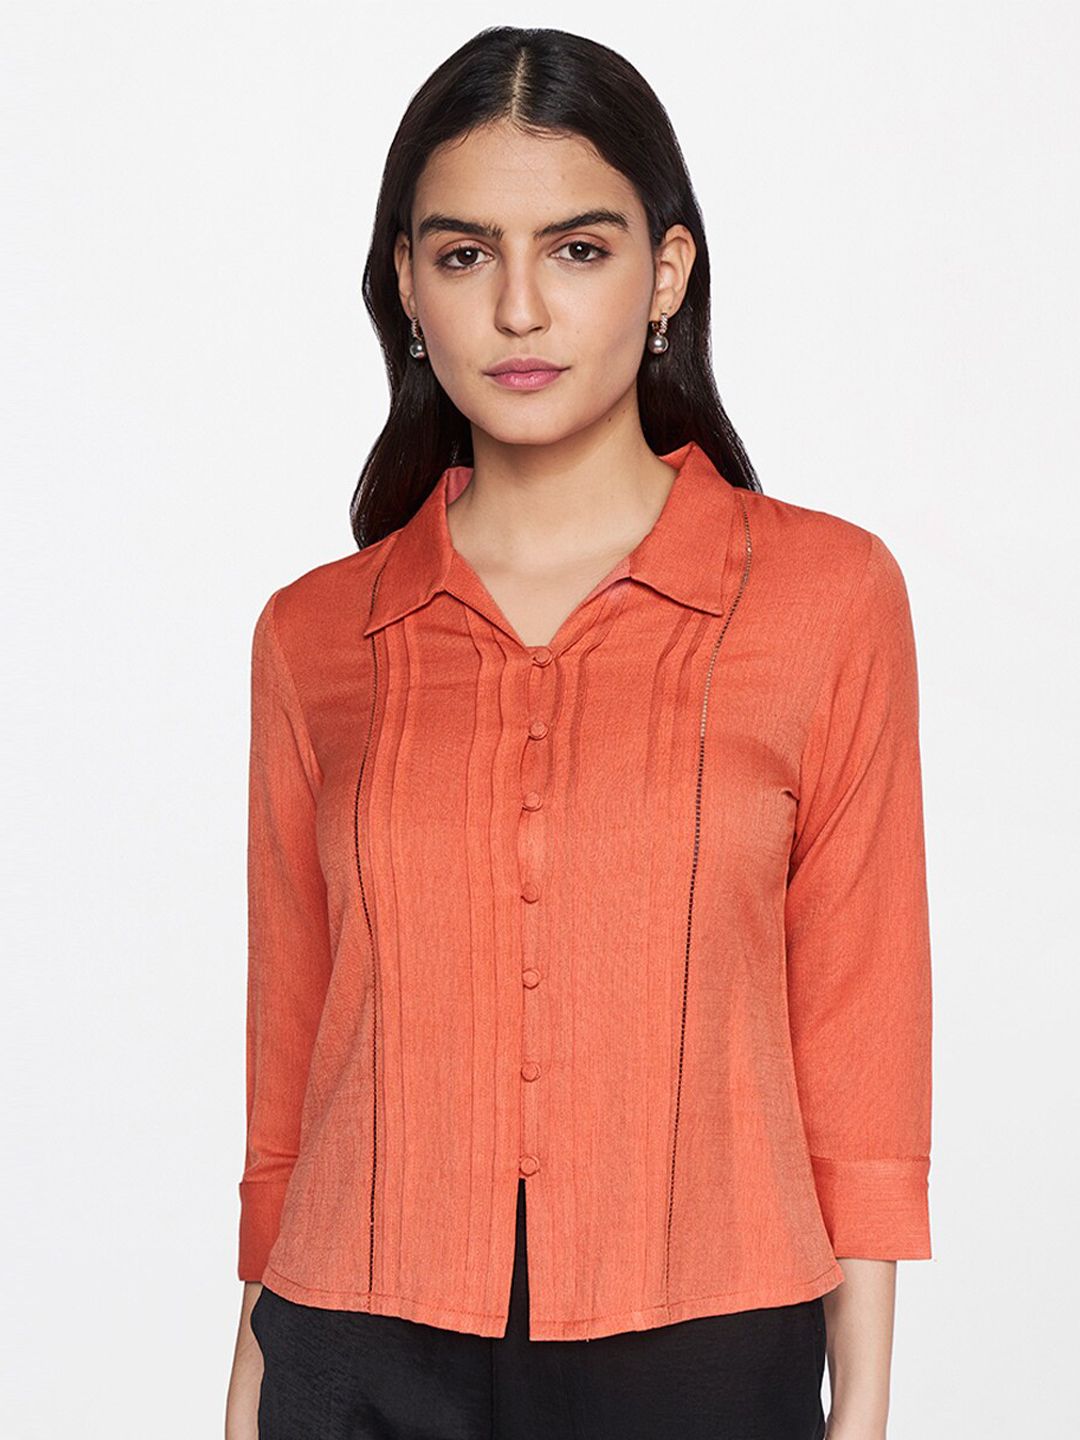 AND Orange Shirt Style Top Price in India